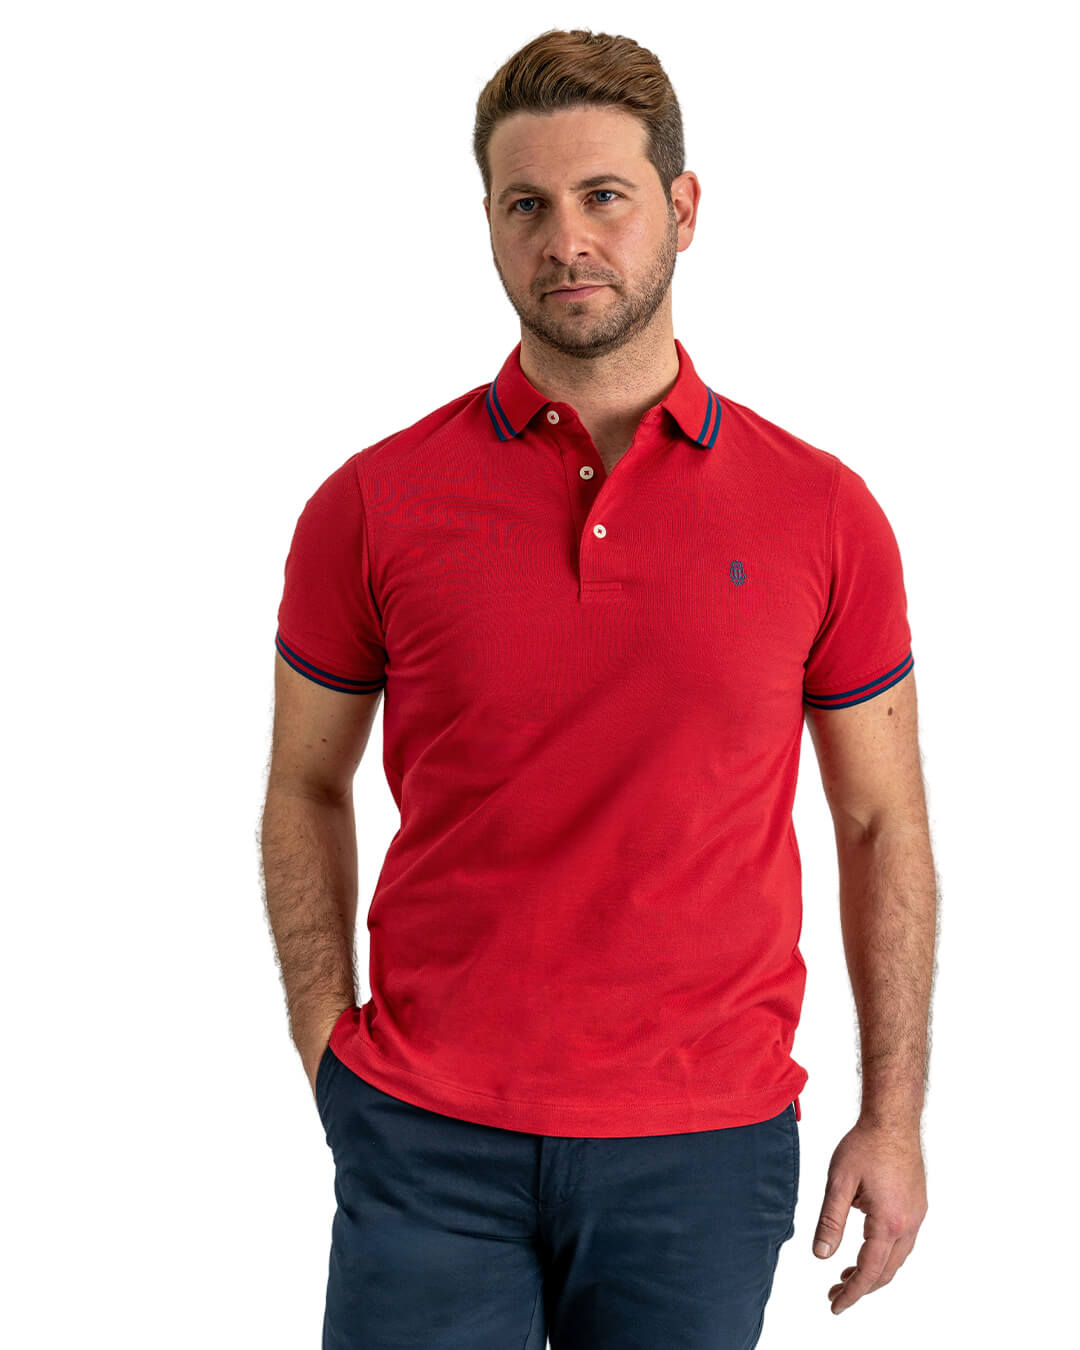 Red Pique Polo Shirt With Double Tipped Collar & Cuff